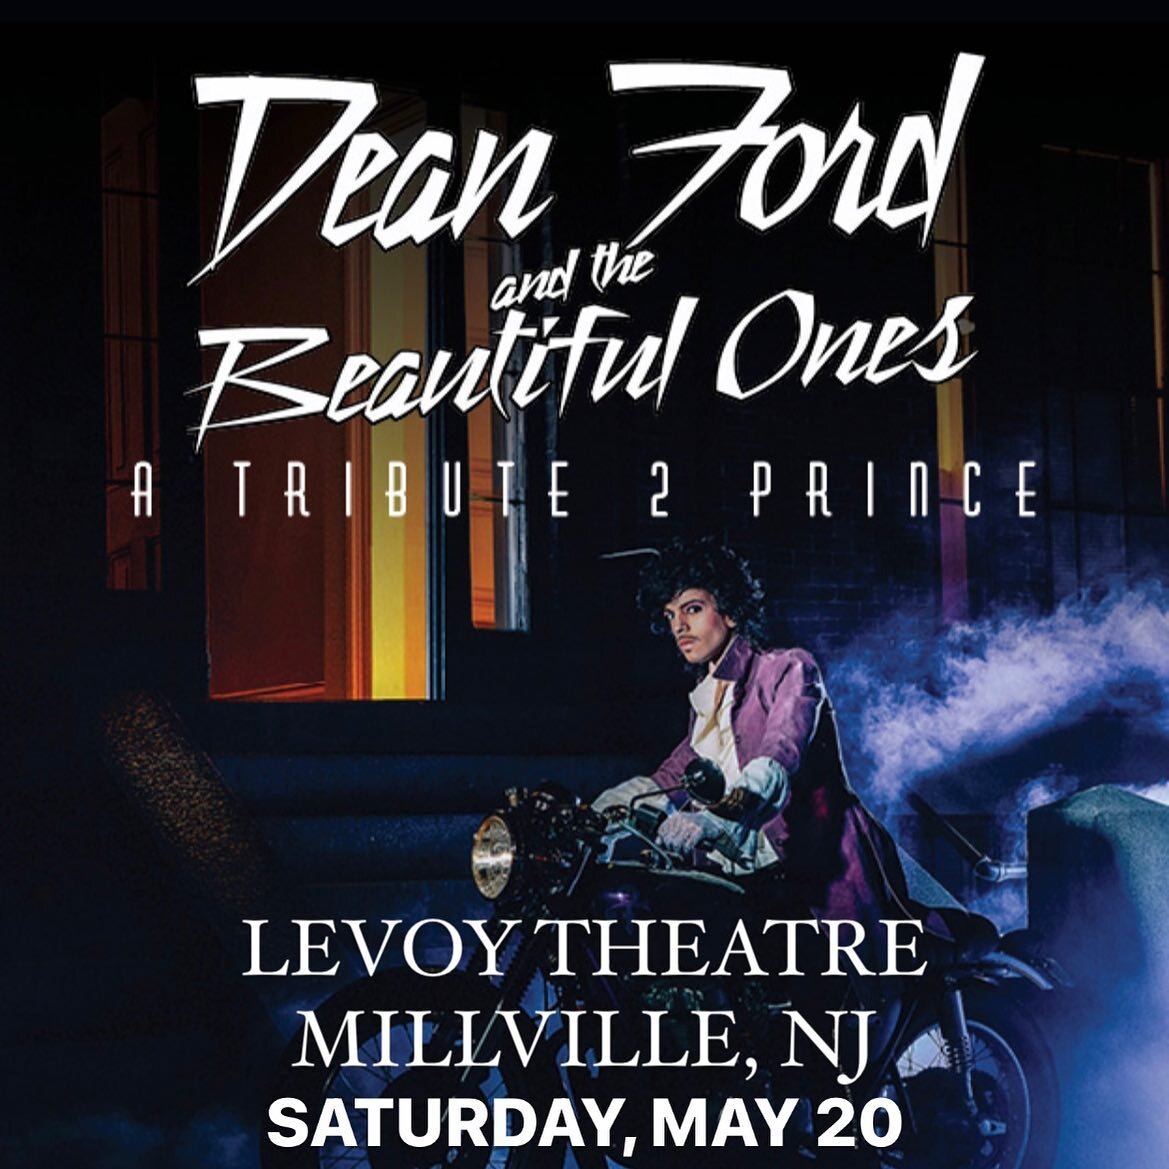 5/20 SATURDAY 🚨:: Millville, NJ - Can&rsquo;t wait 2 party at Levoy Theatre!

🎶:: A Tribute 2 PRINCE
📅:: Saturday, May 20th
📍:: Levoy Theatre | Millville, NJ
🎟:: ON SALE NOW